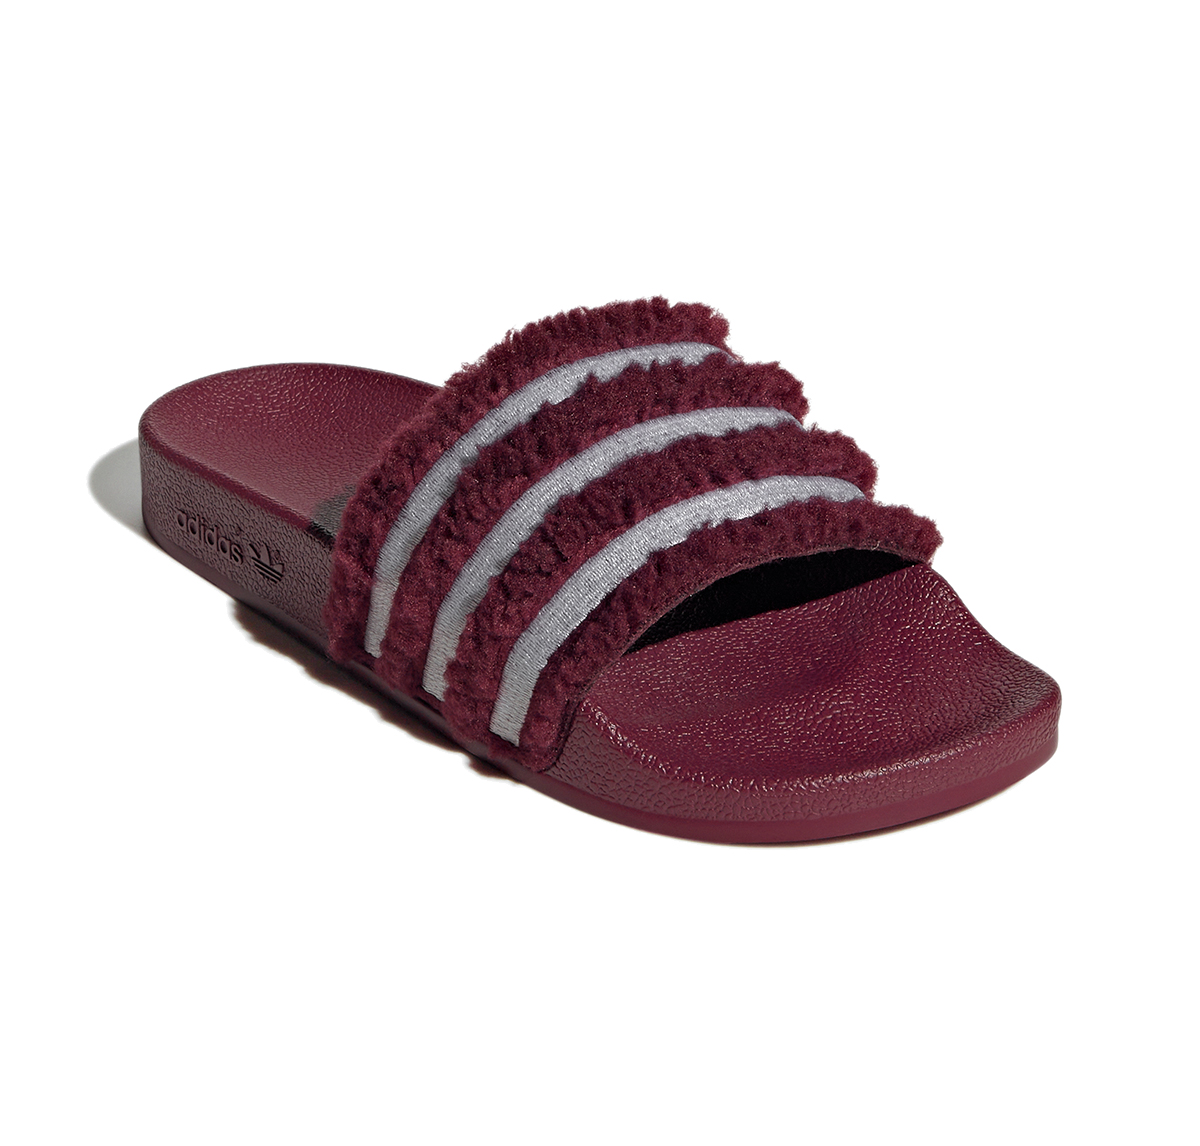 adidas Originals Adilette Fur Womens - Shadow Red front view